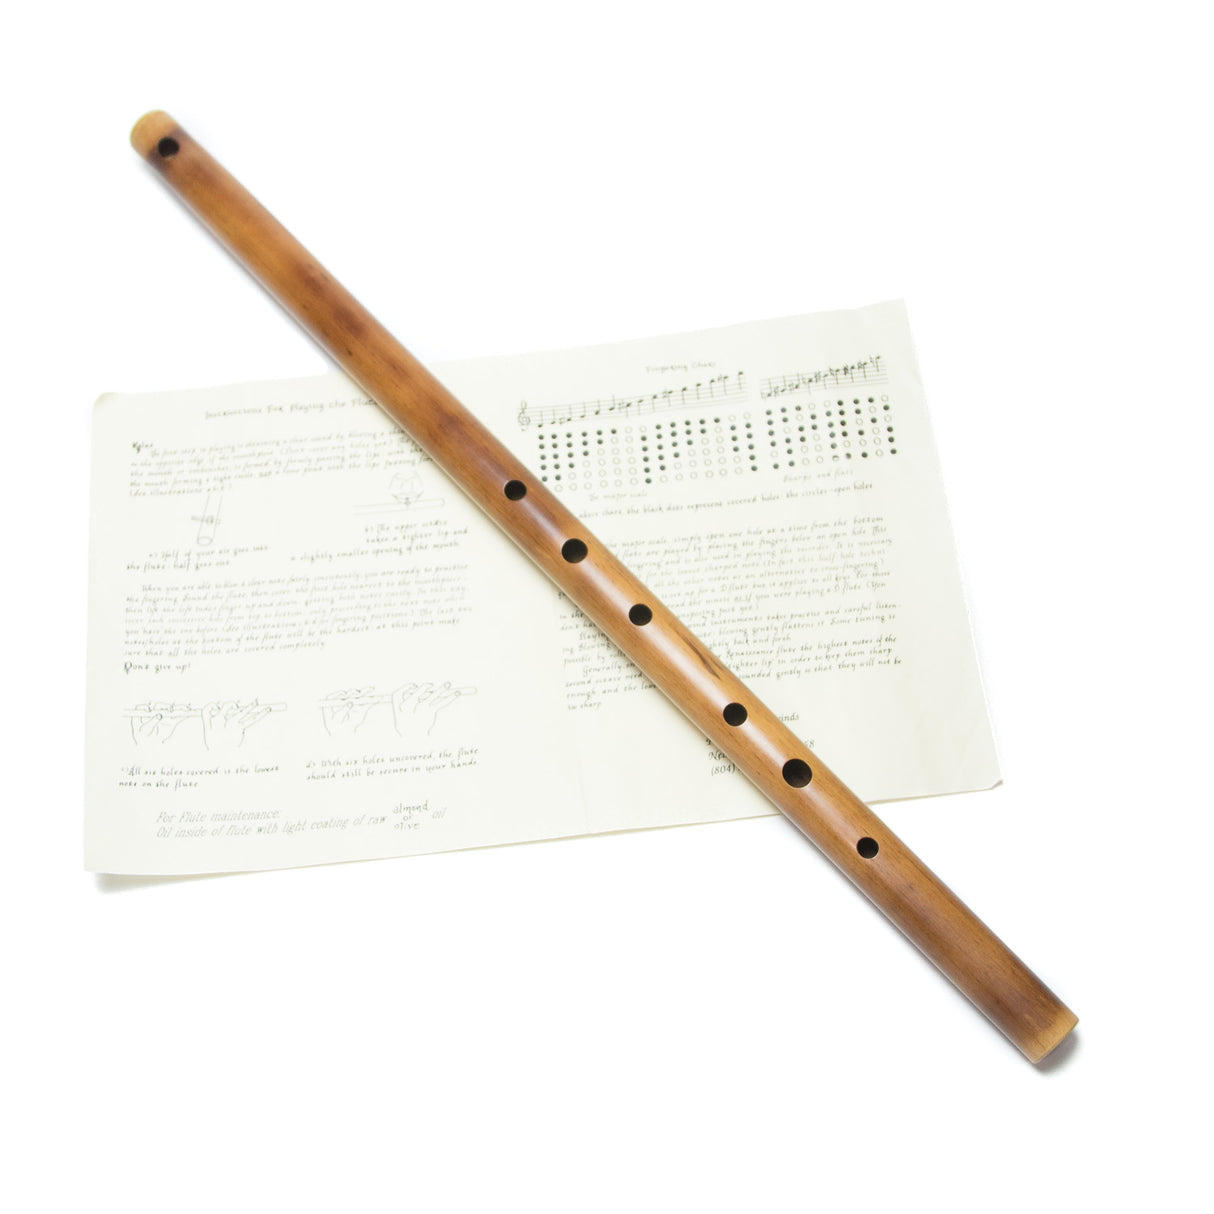 Olwell Bamboo Flute